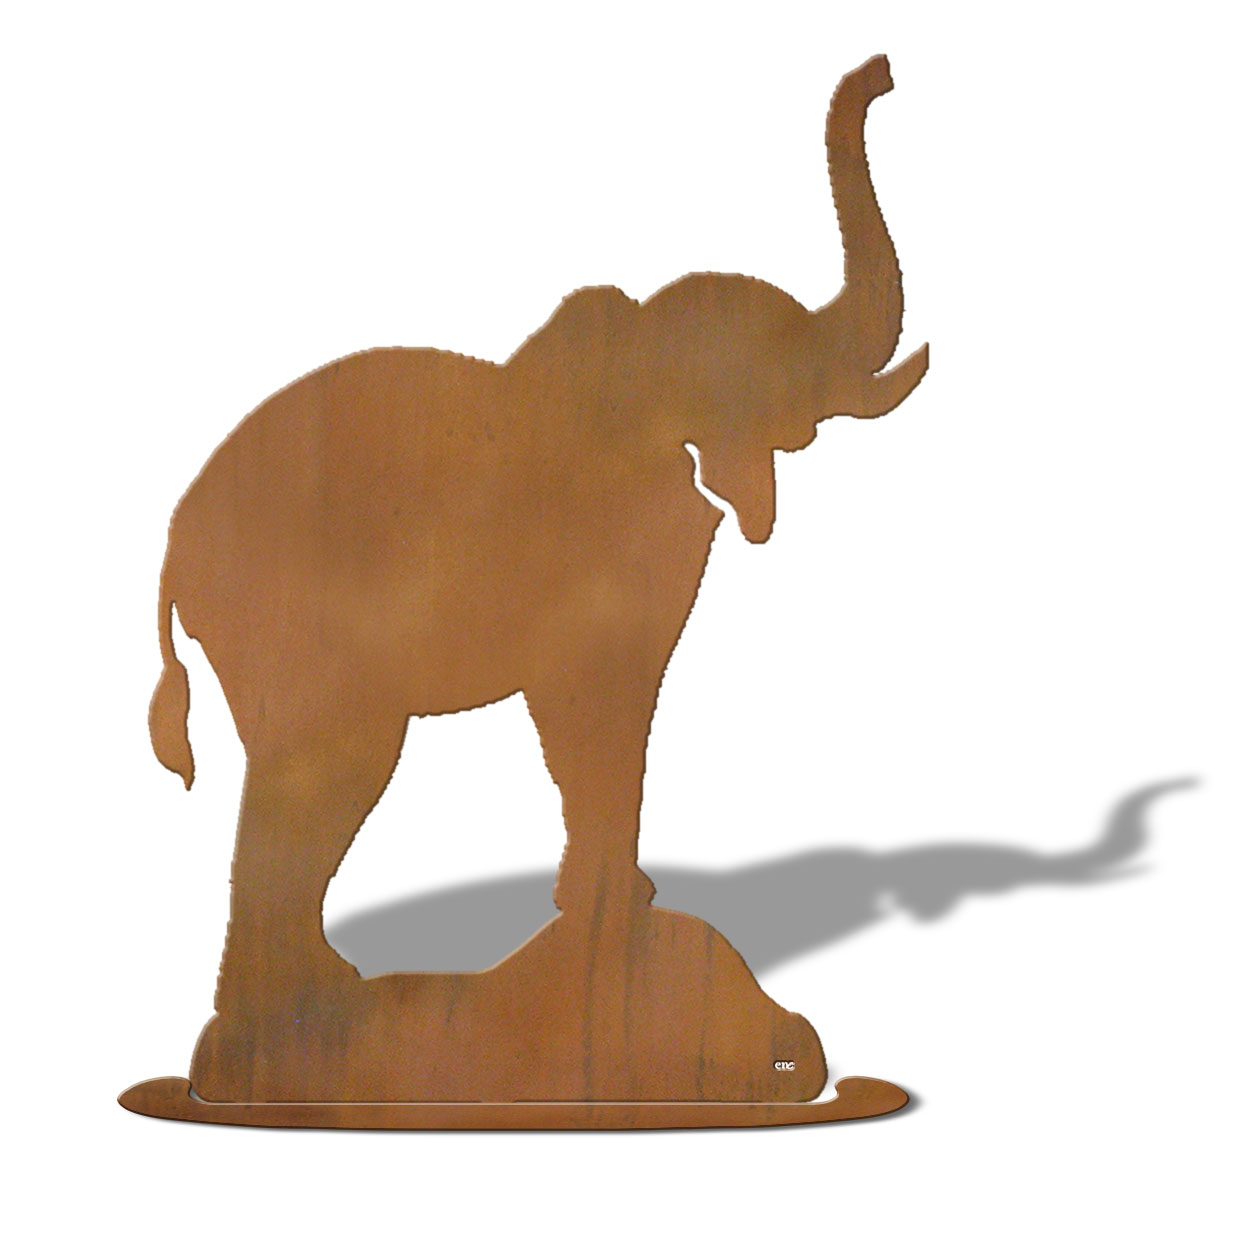 623426r - Tabletop Art - 13in x 18in - Elephant - Rust Patina